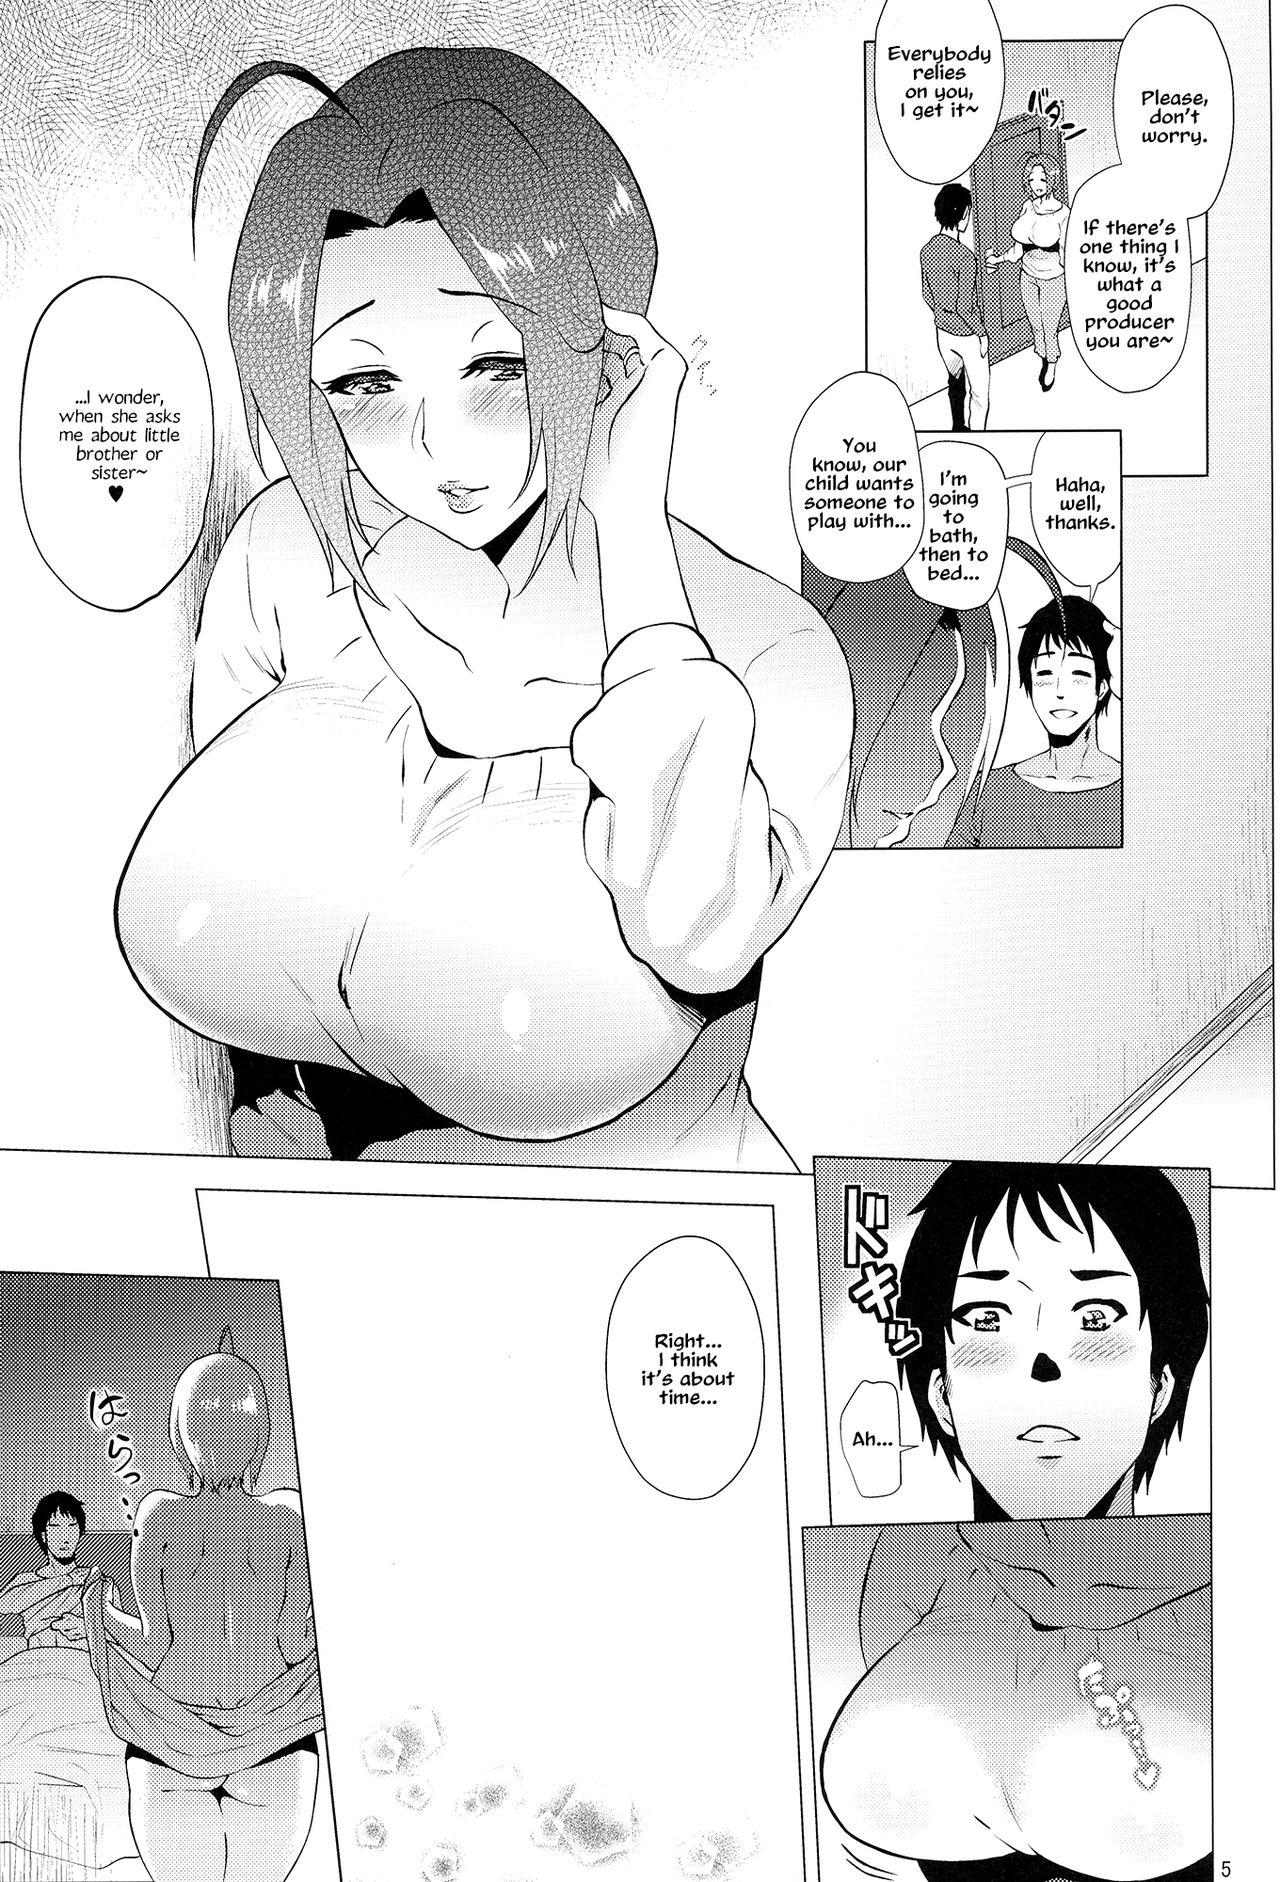 Casa Itsumademo Anata to. | Forever Together - The idolmaster Slave - Page 5